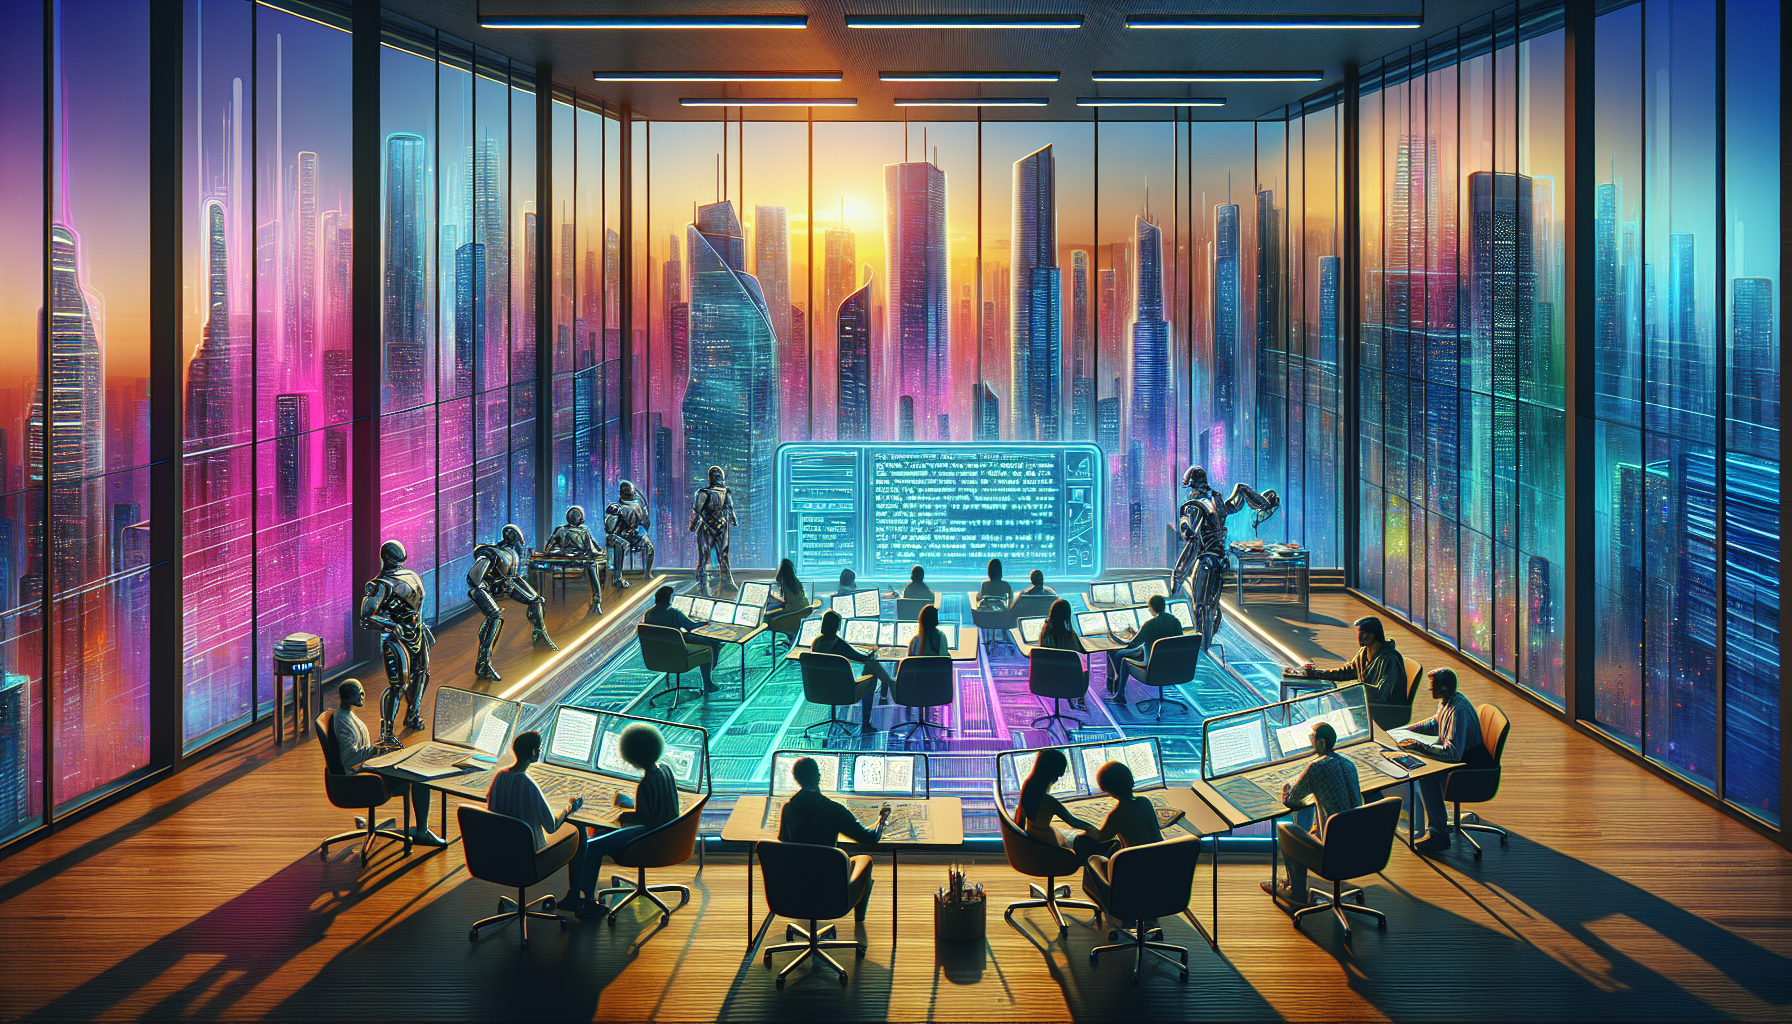 A futuristic writer's room filled with diverse authors brainstorming around a high-tech holographic table displaying dynamic script scenes, with robots assisting in background, inside a glass-walled s